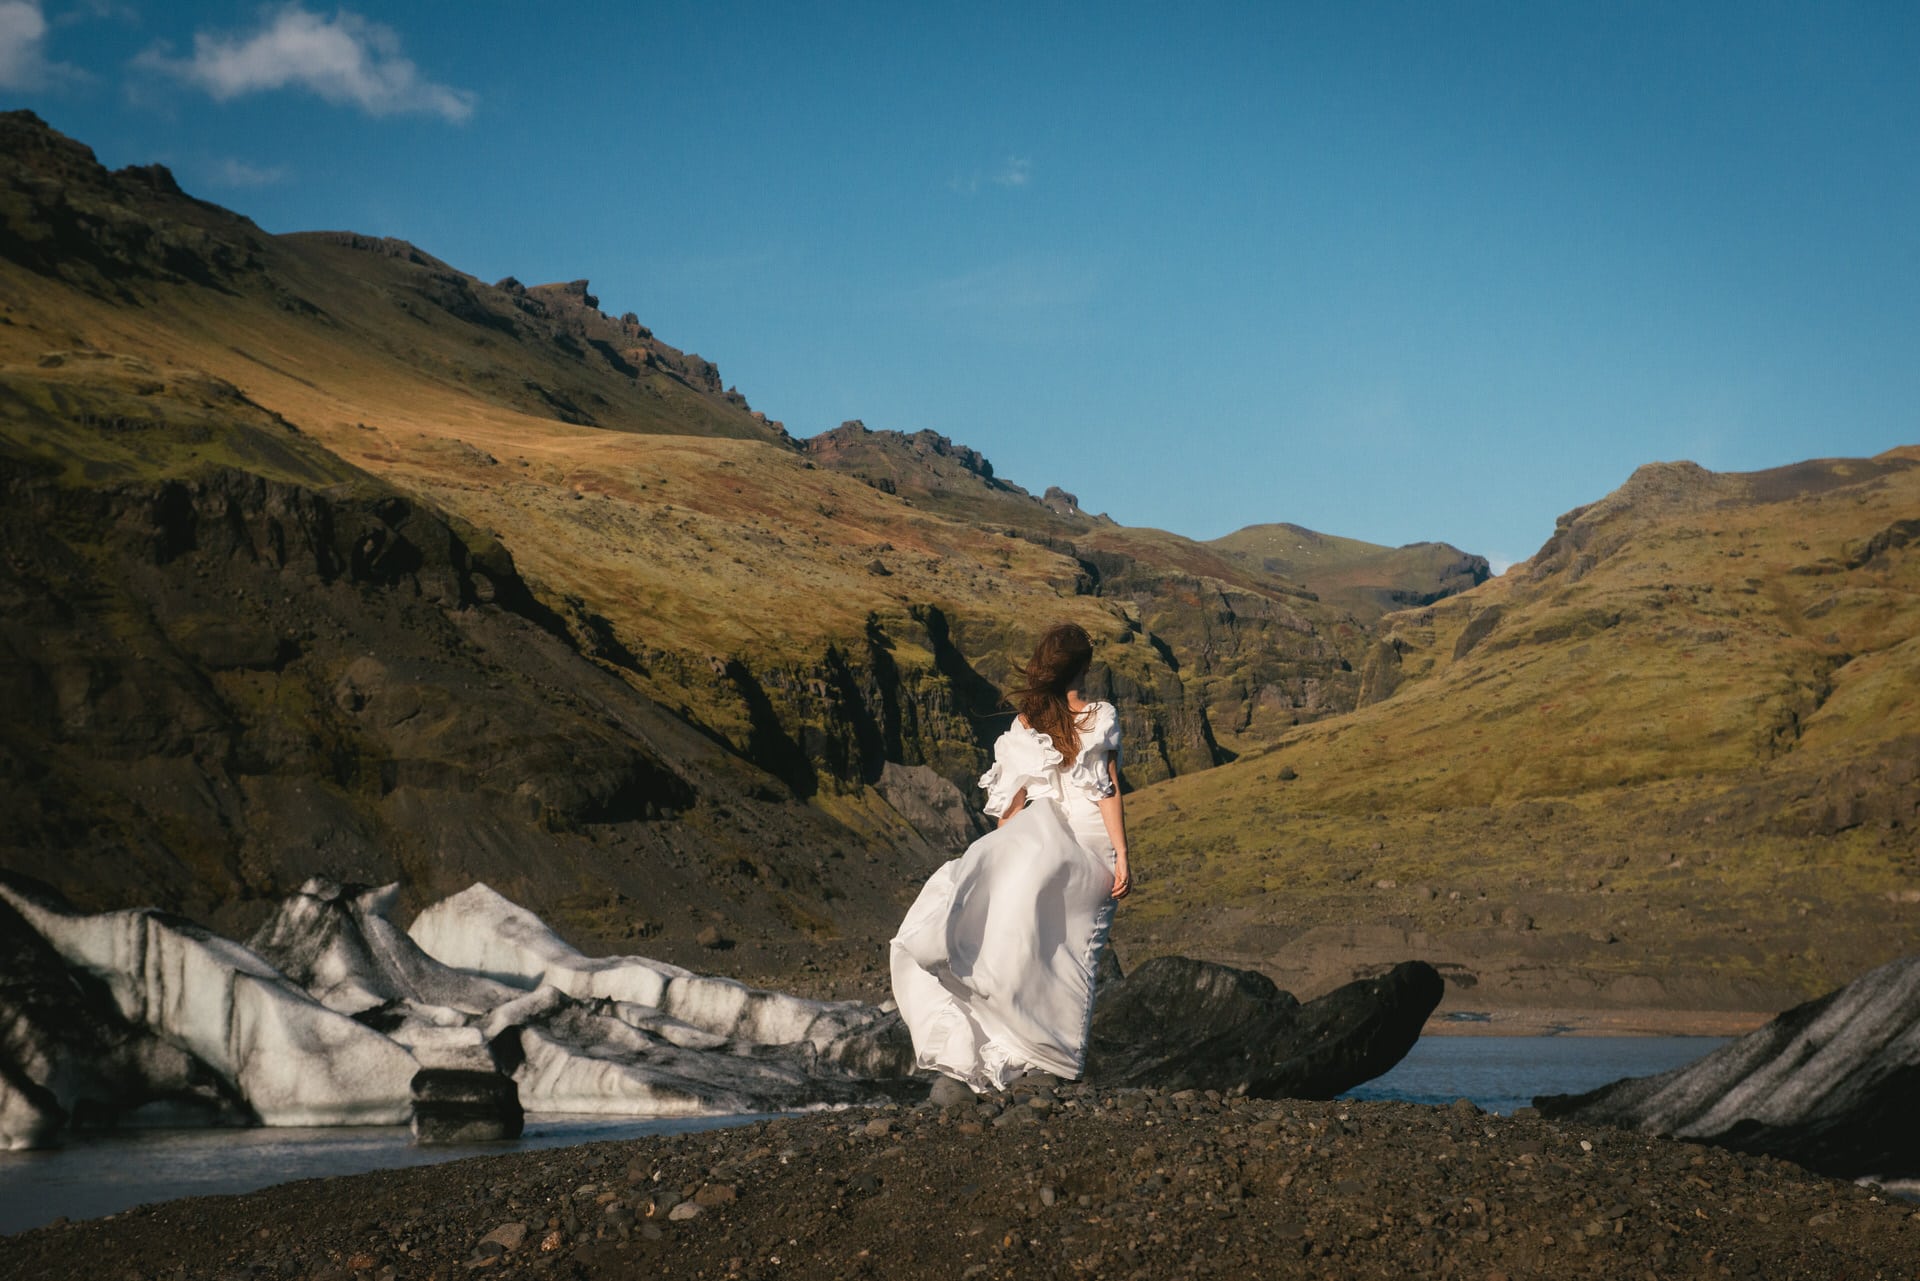 Post-wedding session on a glacier in Iceland